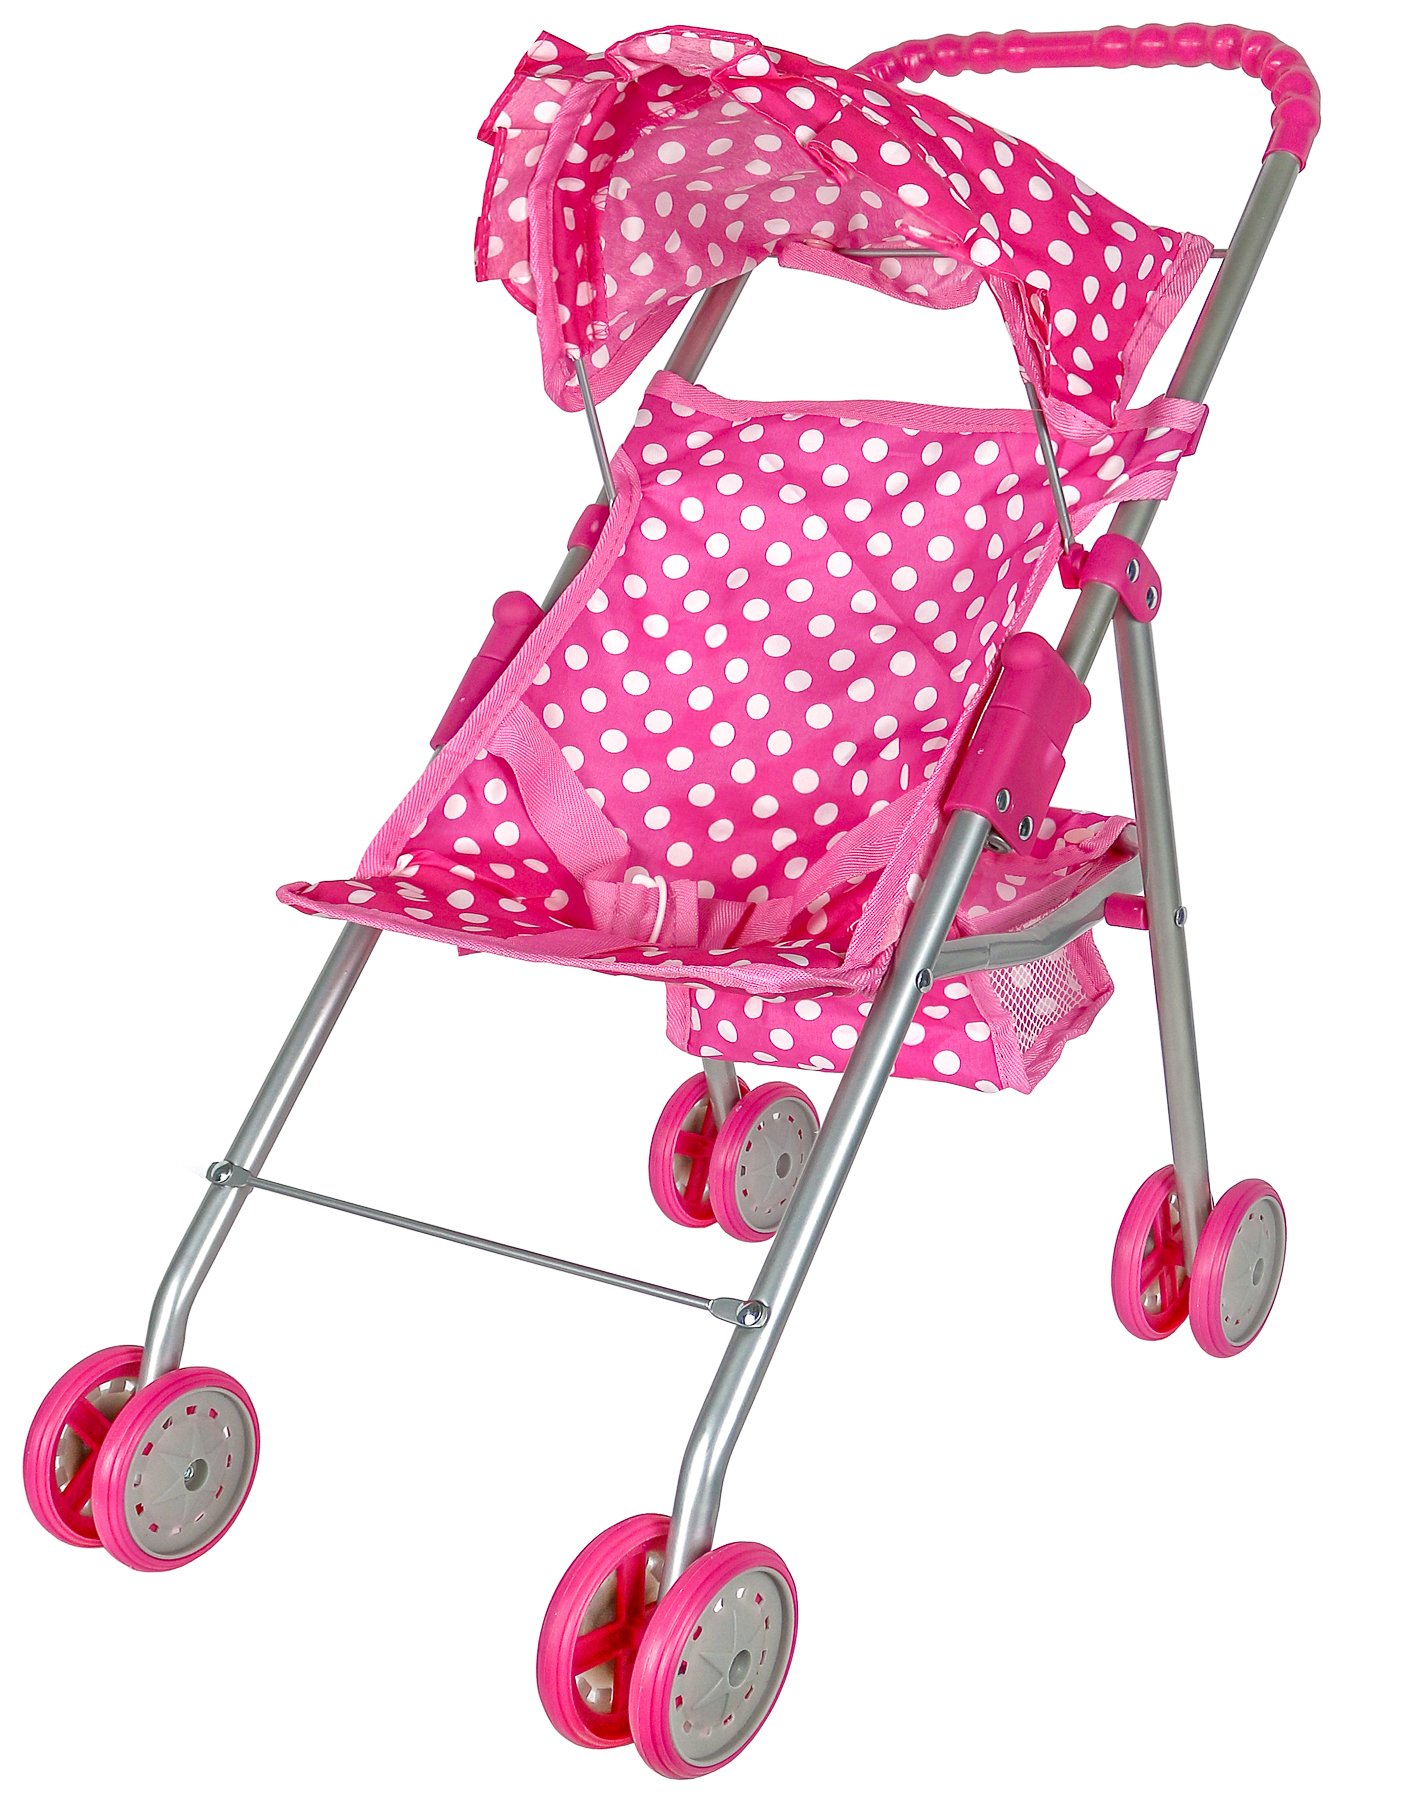 Precious Toys Baby Doll Stroller, Pink & White Polka Dots Baby Stroller for Dolls, Foldable with Hood and Basket, Toy Stroller for Baby Dolls, Doll Strollers for Girls 2 Years Old and Older, Toddlers